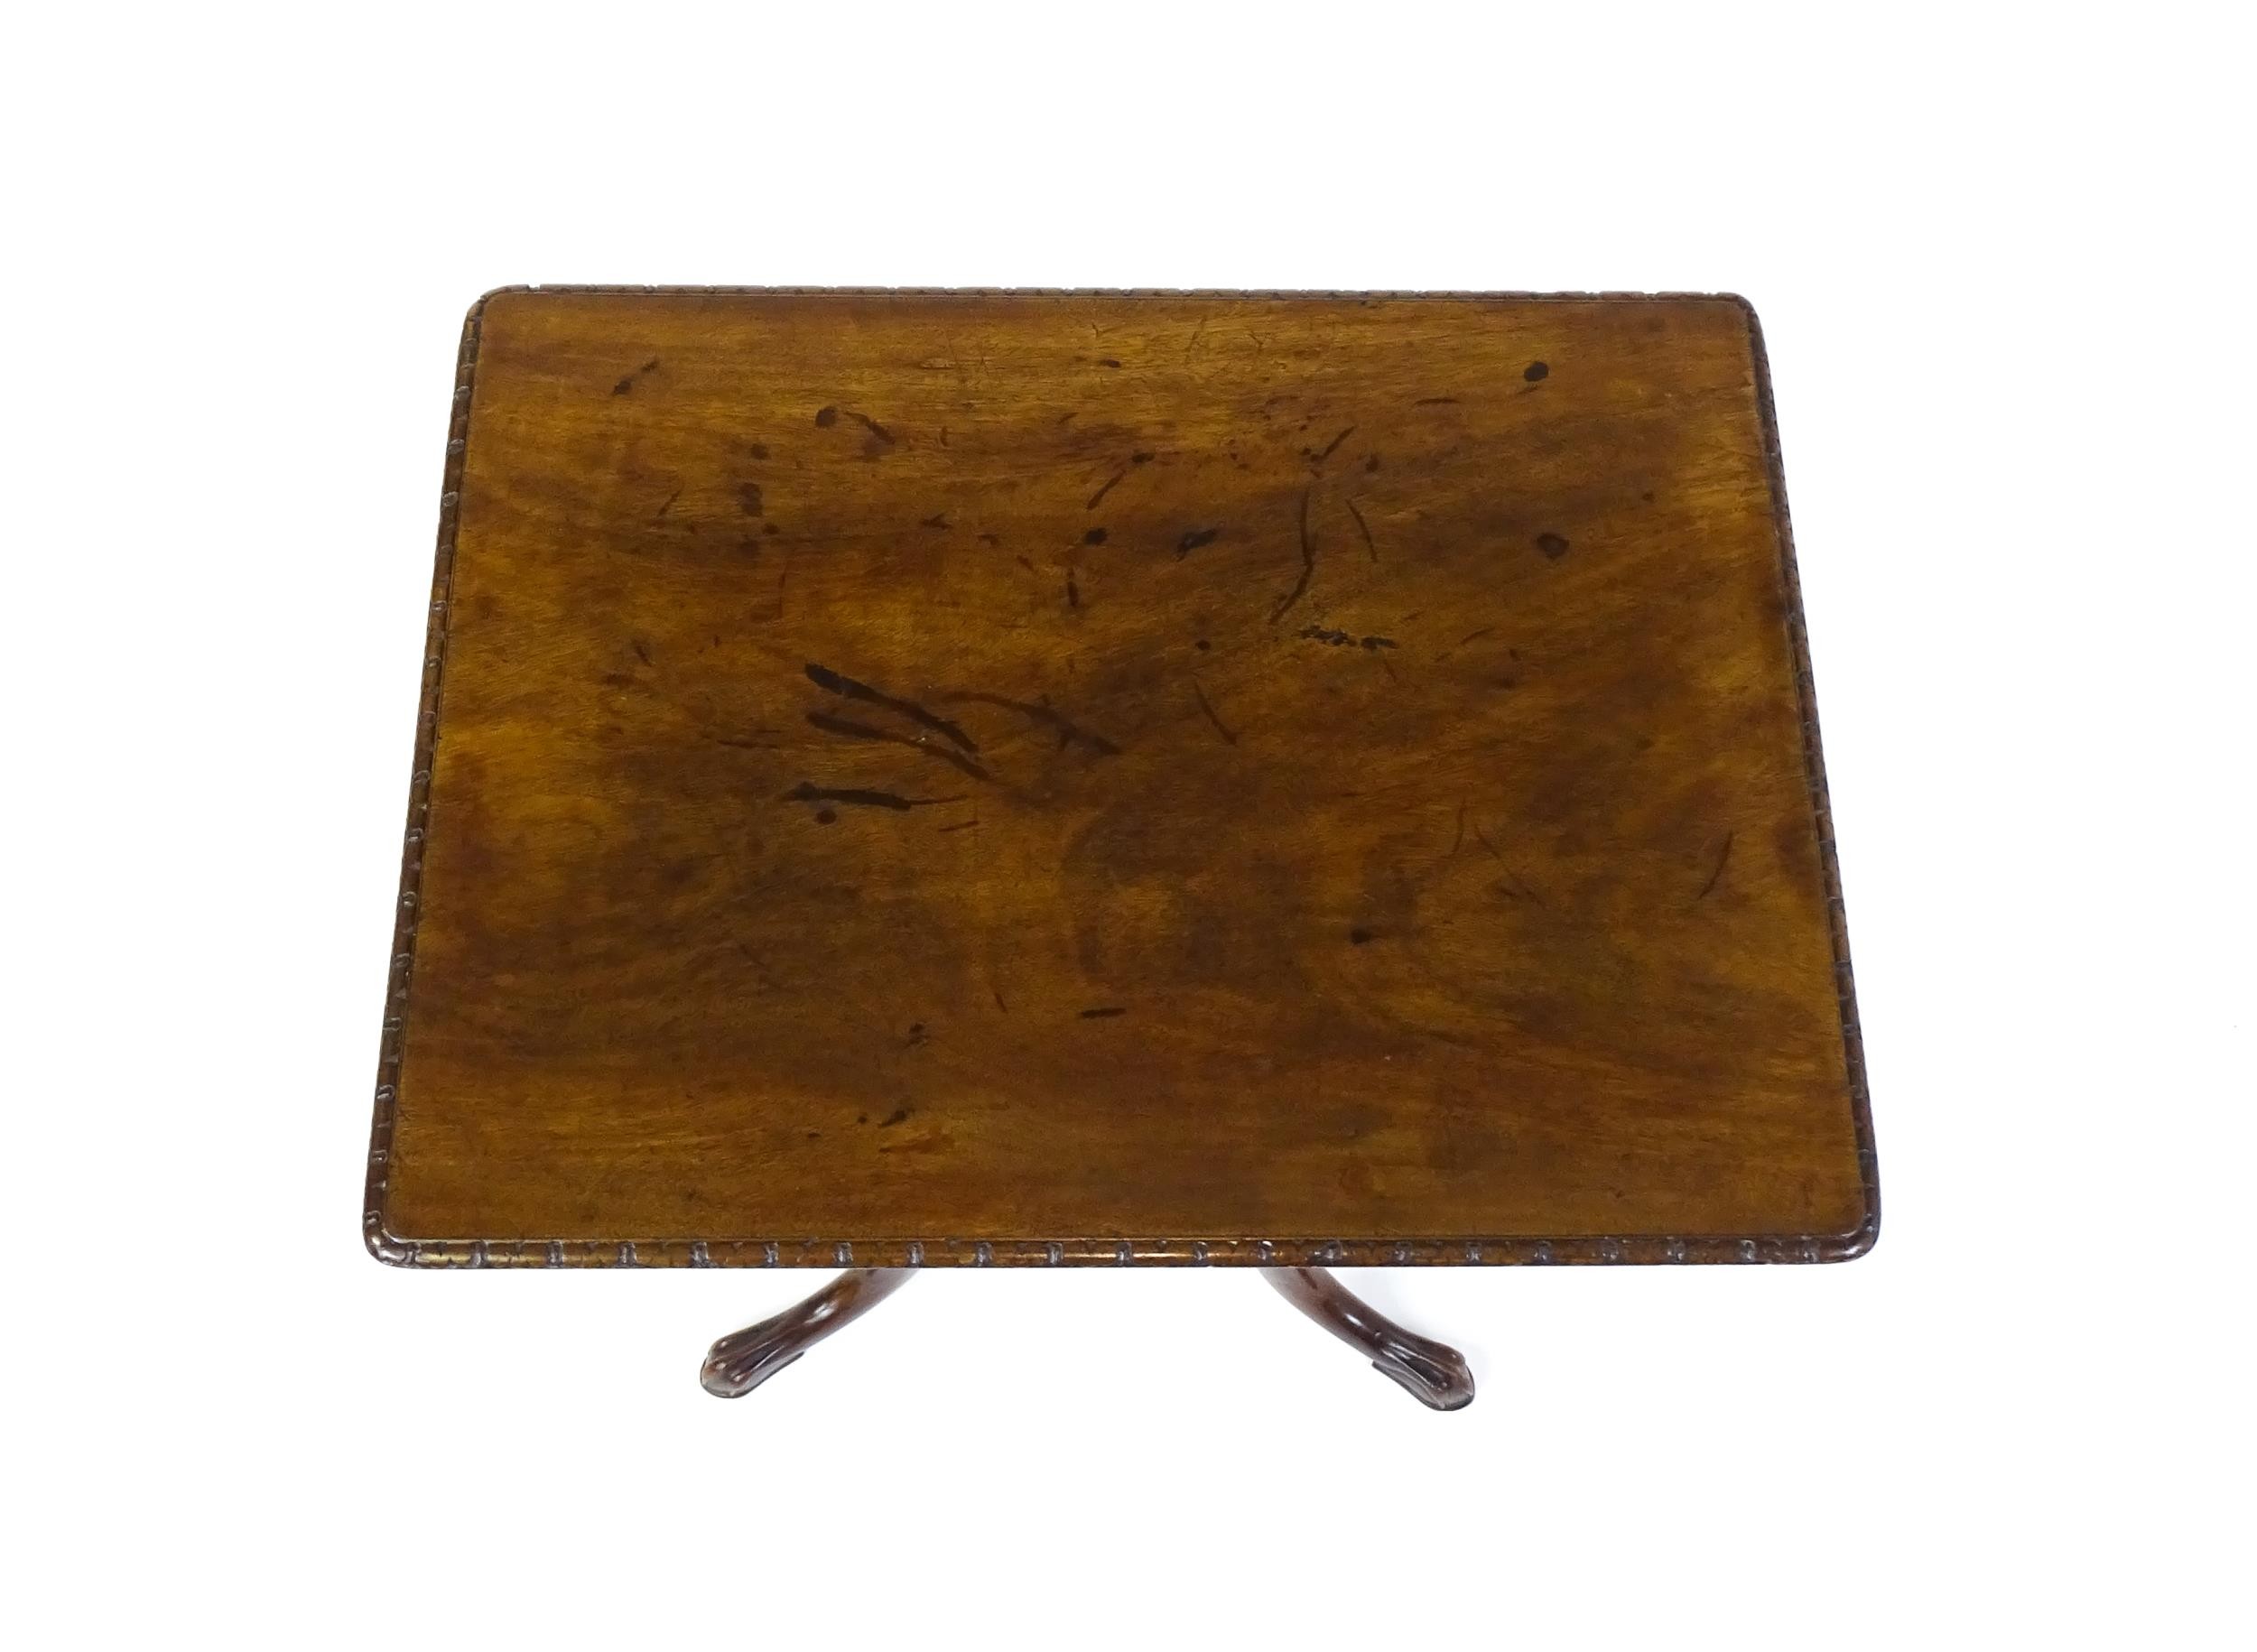 A late 18thC / early 19thC mahogany occasional table with a rectangular top and carved edge above - Image 8 of 12